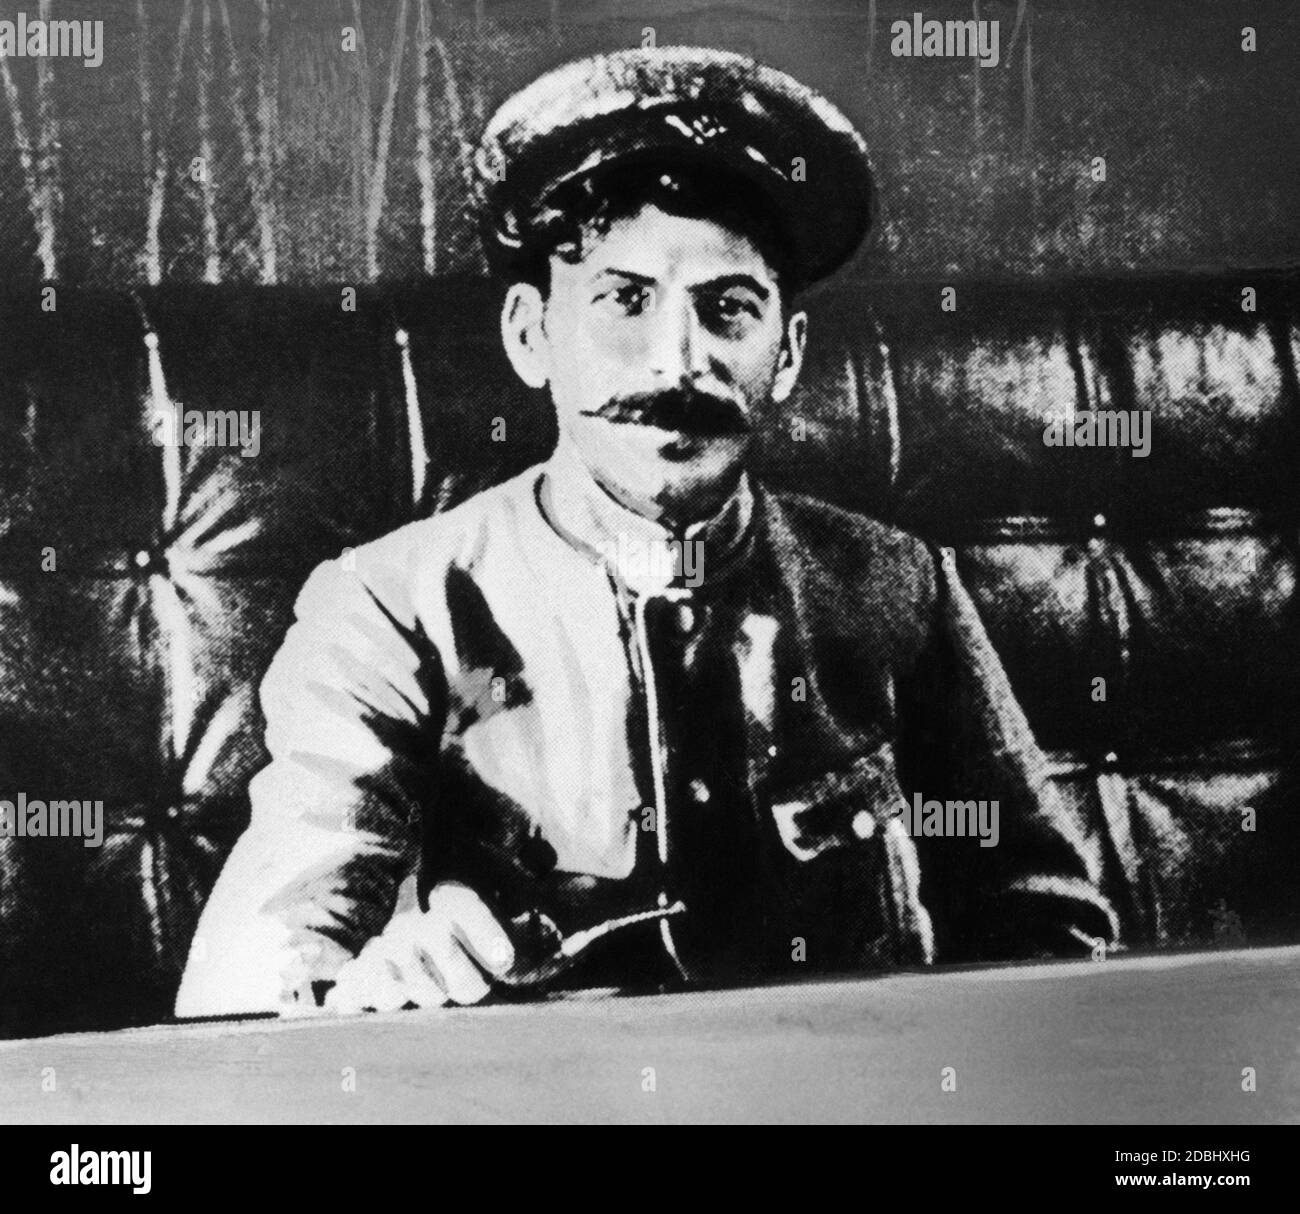 Stalin during the Russian civil war, after the fall of the monarchy. After several years of exile, following the revolutions of 1918, he joined Lenin as he rejected the government and Kerensky. He became Commissar of Nationalities. Stock Photo